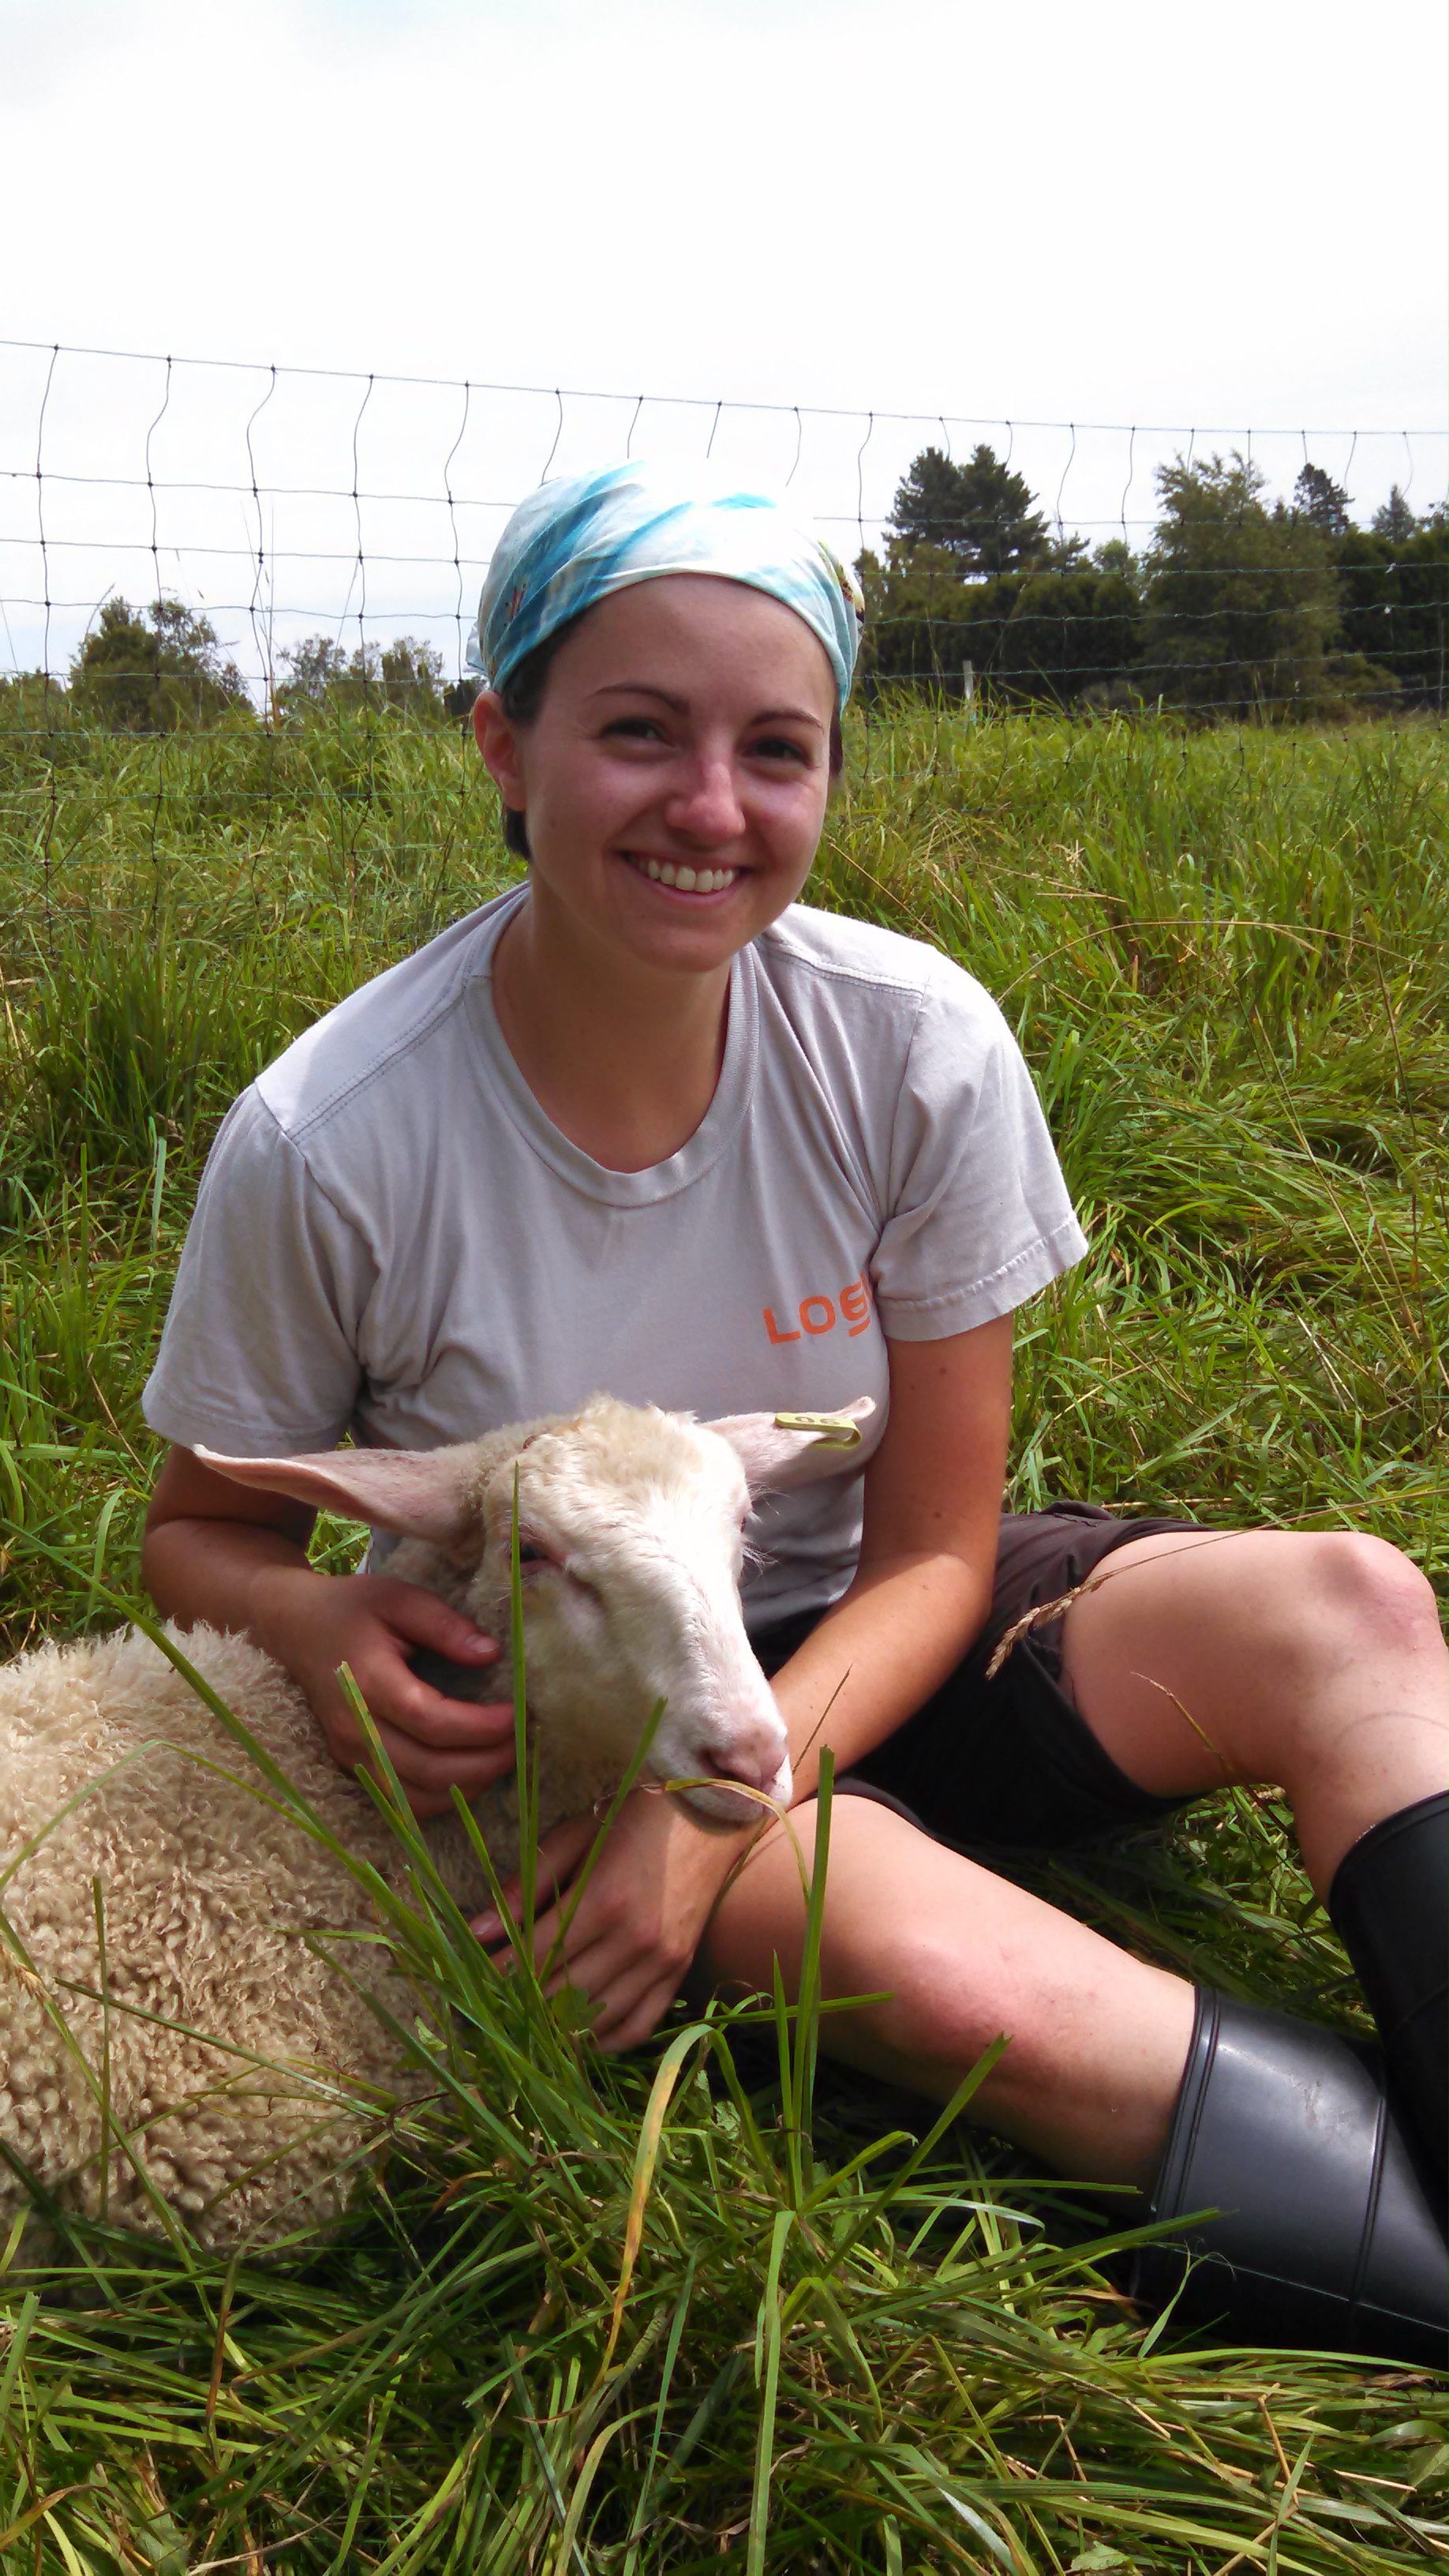 Sue sitting with a lamb in a grassy field.